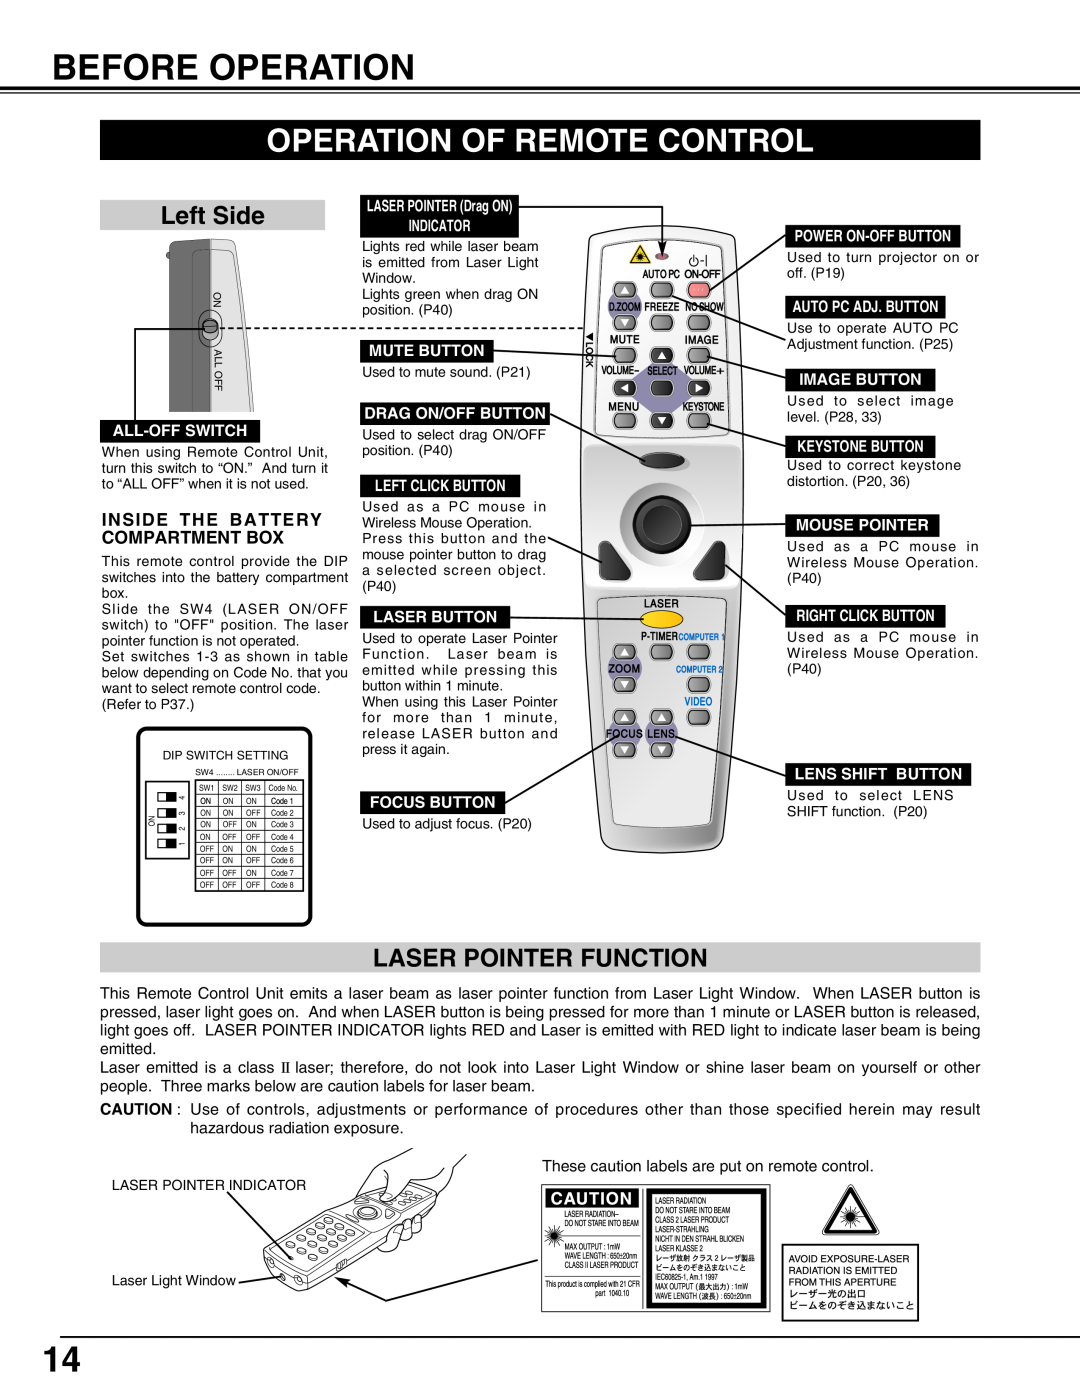 Sanyo PLC-XT11, PLC-XT16 owner manual Before Operation, Operation Of Remote Control, Left Side, Laser Pointer Function 